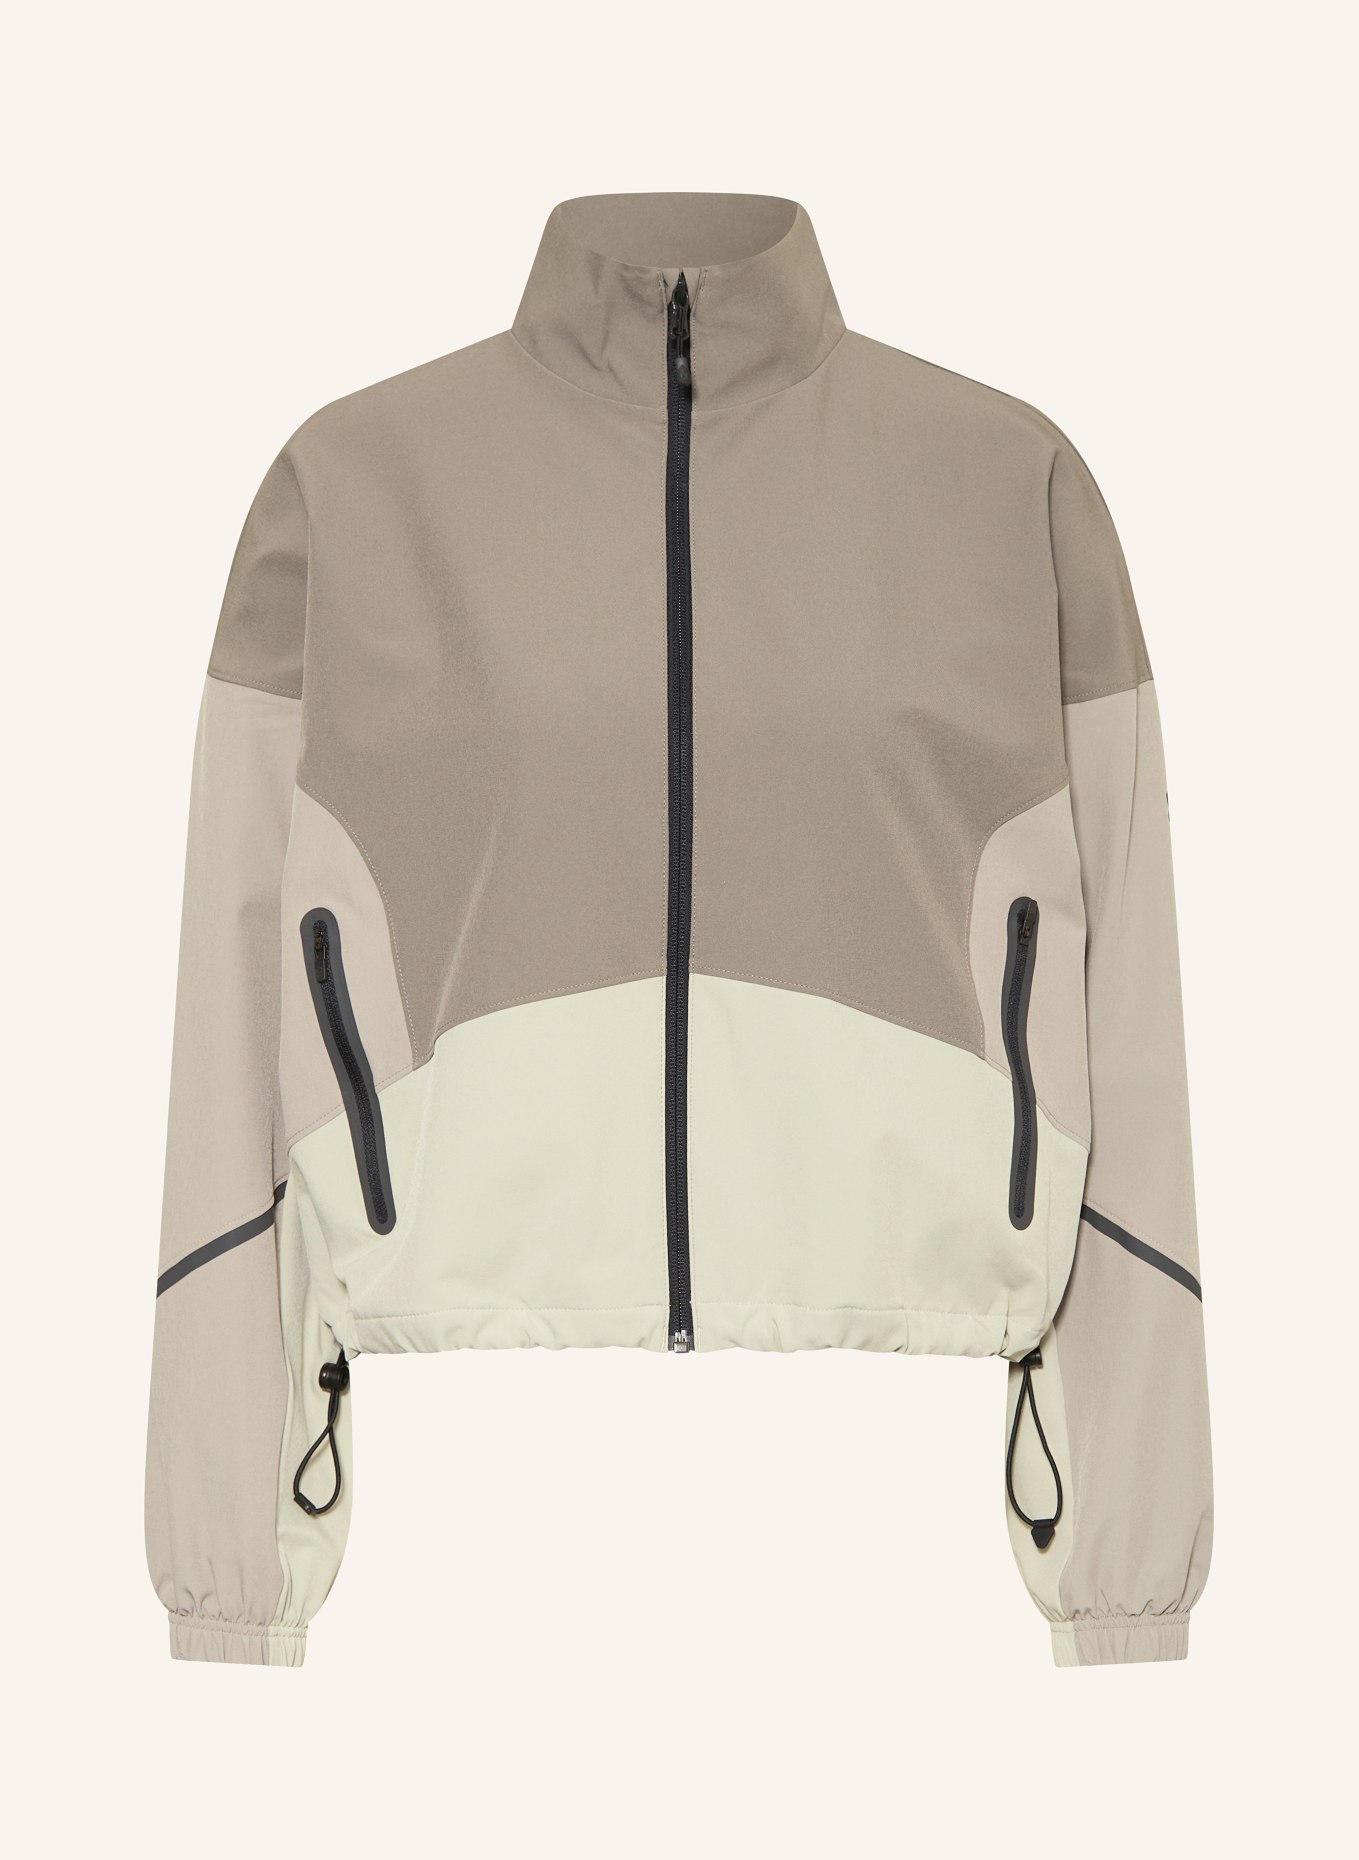 UNDER ARMOUR Trainingsjacke UNSTOPPABLE, Farbe: TAUPE/ CREME (Bild 1)